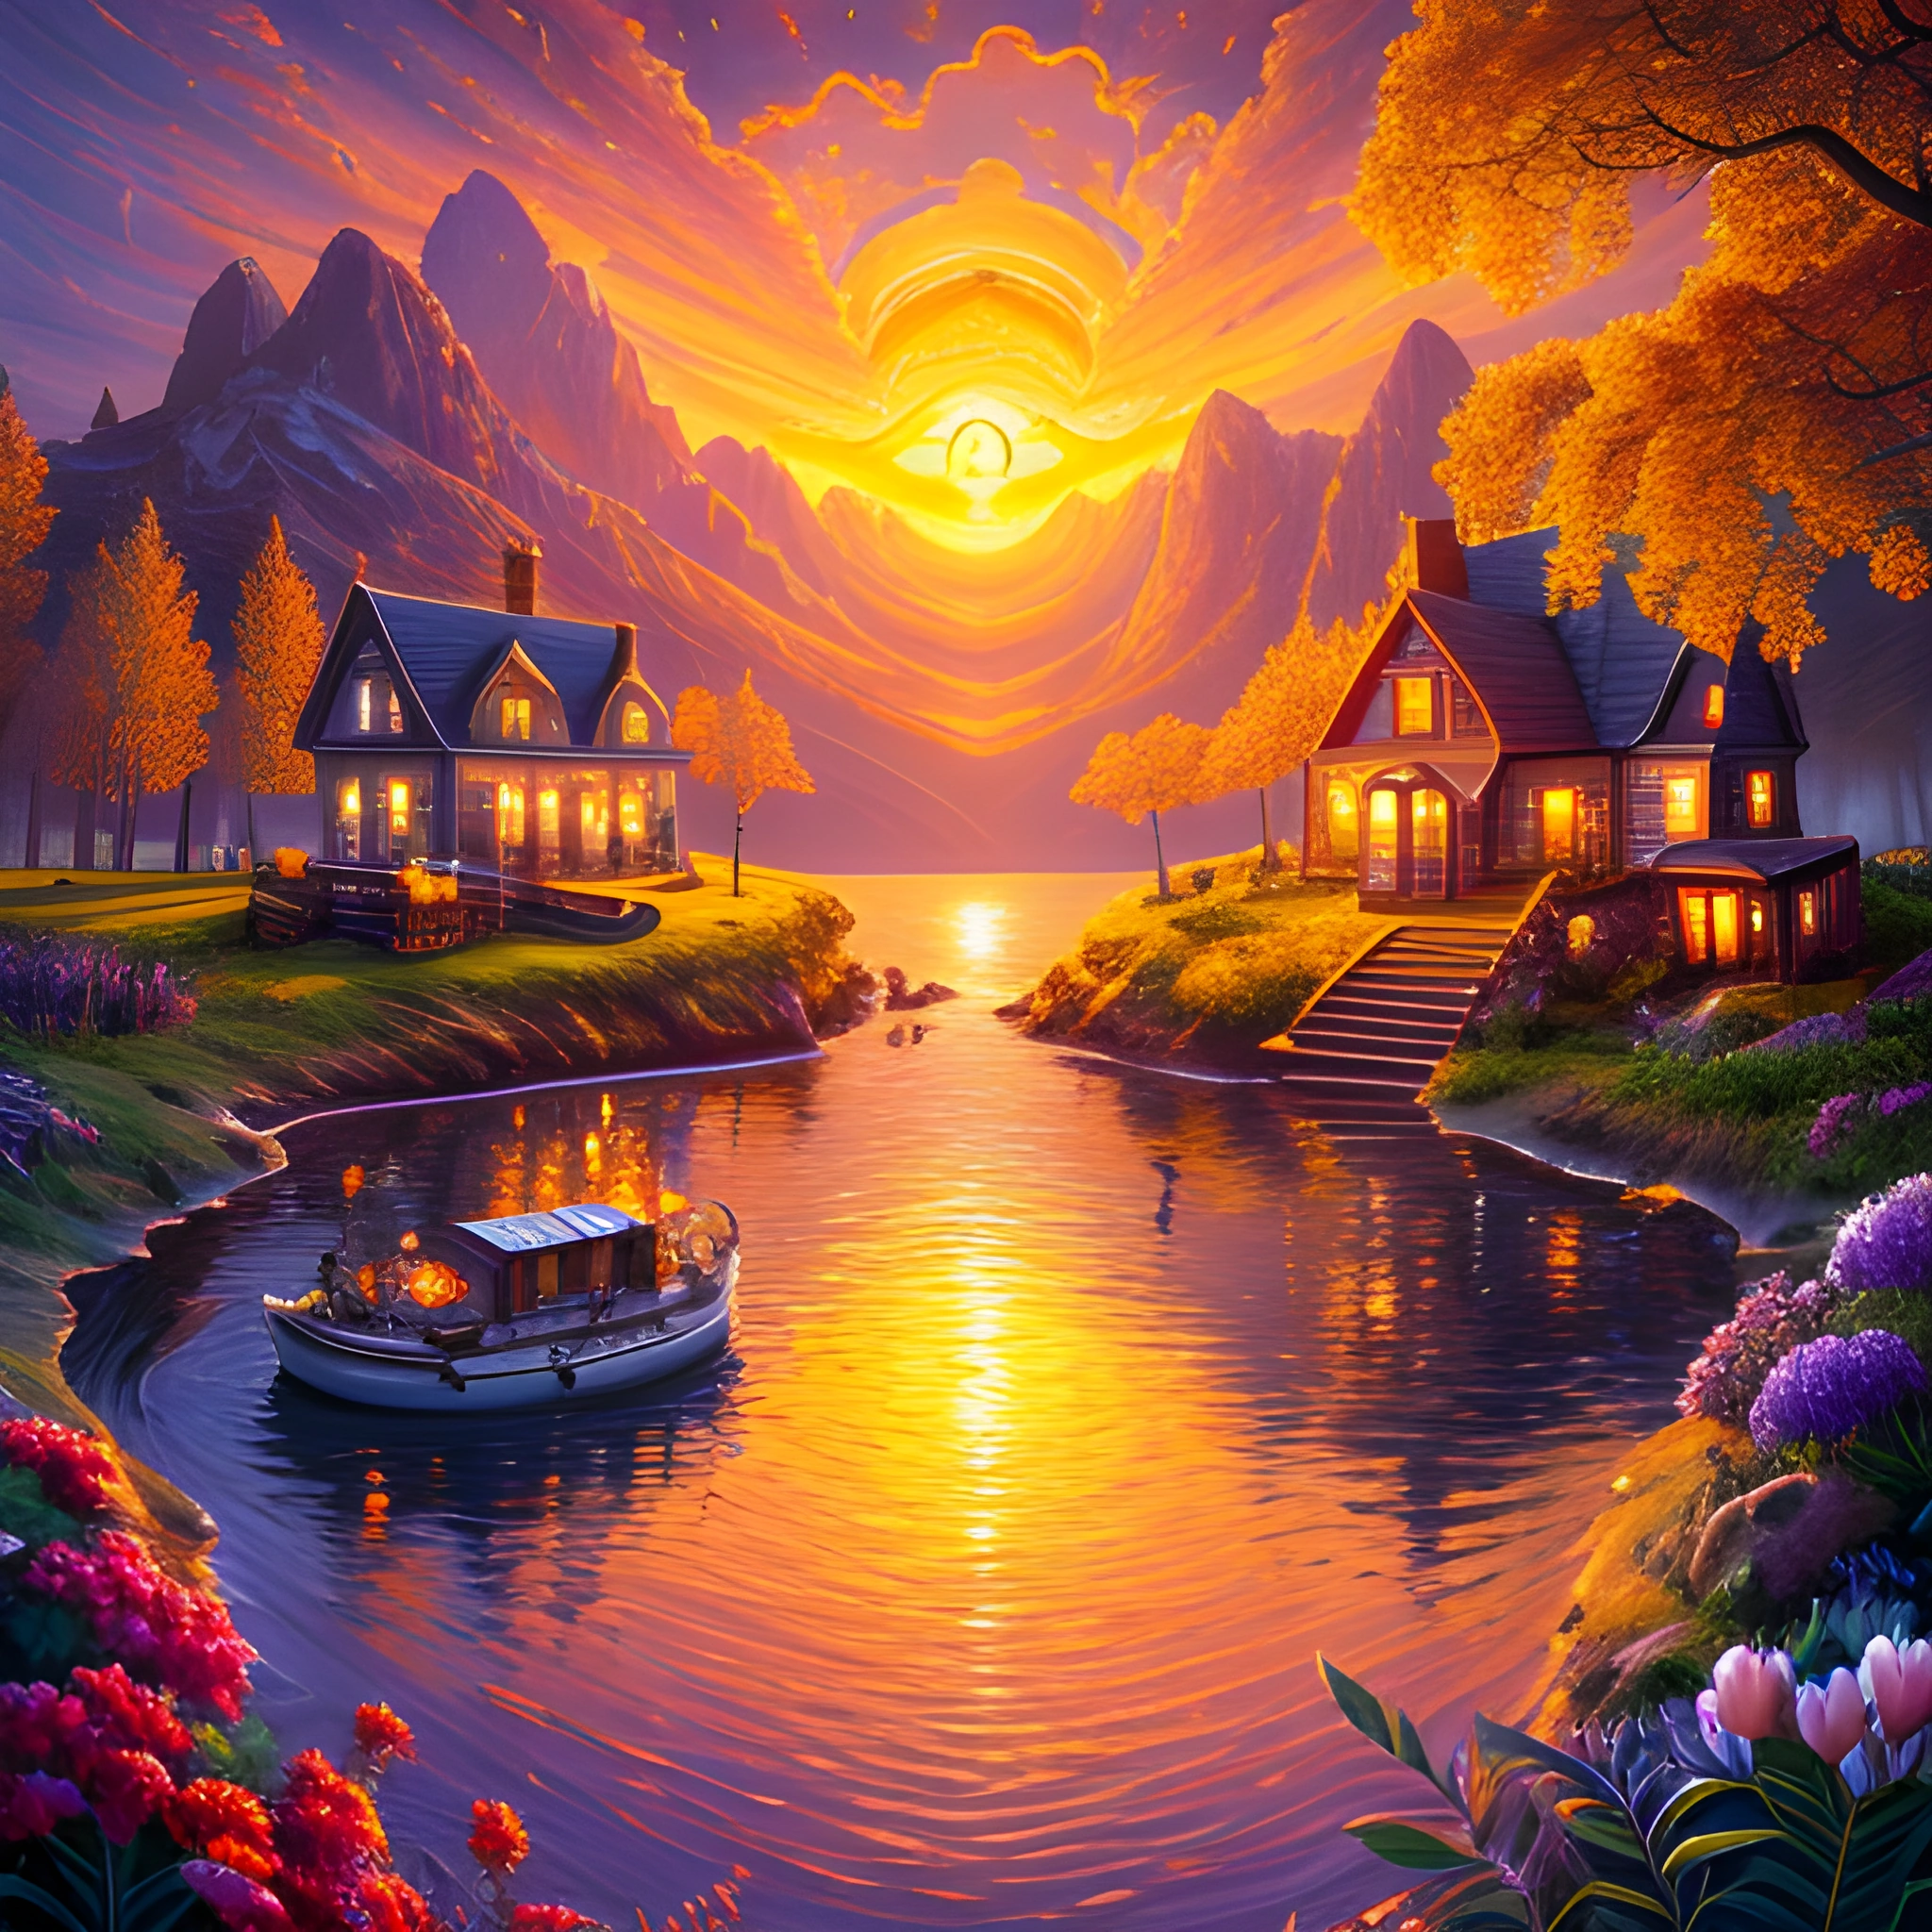 painting of a boat in a lake with a sunset in the background